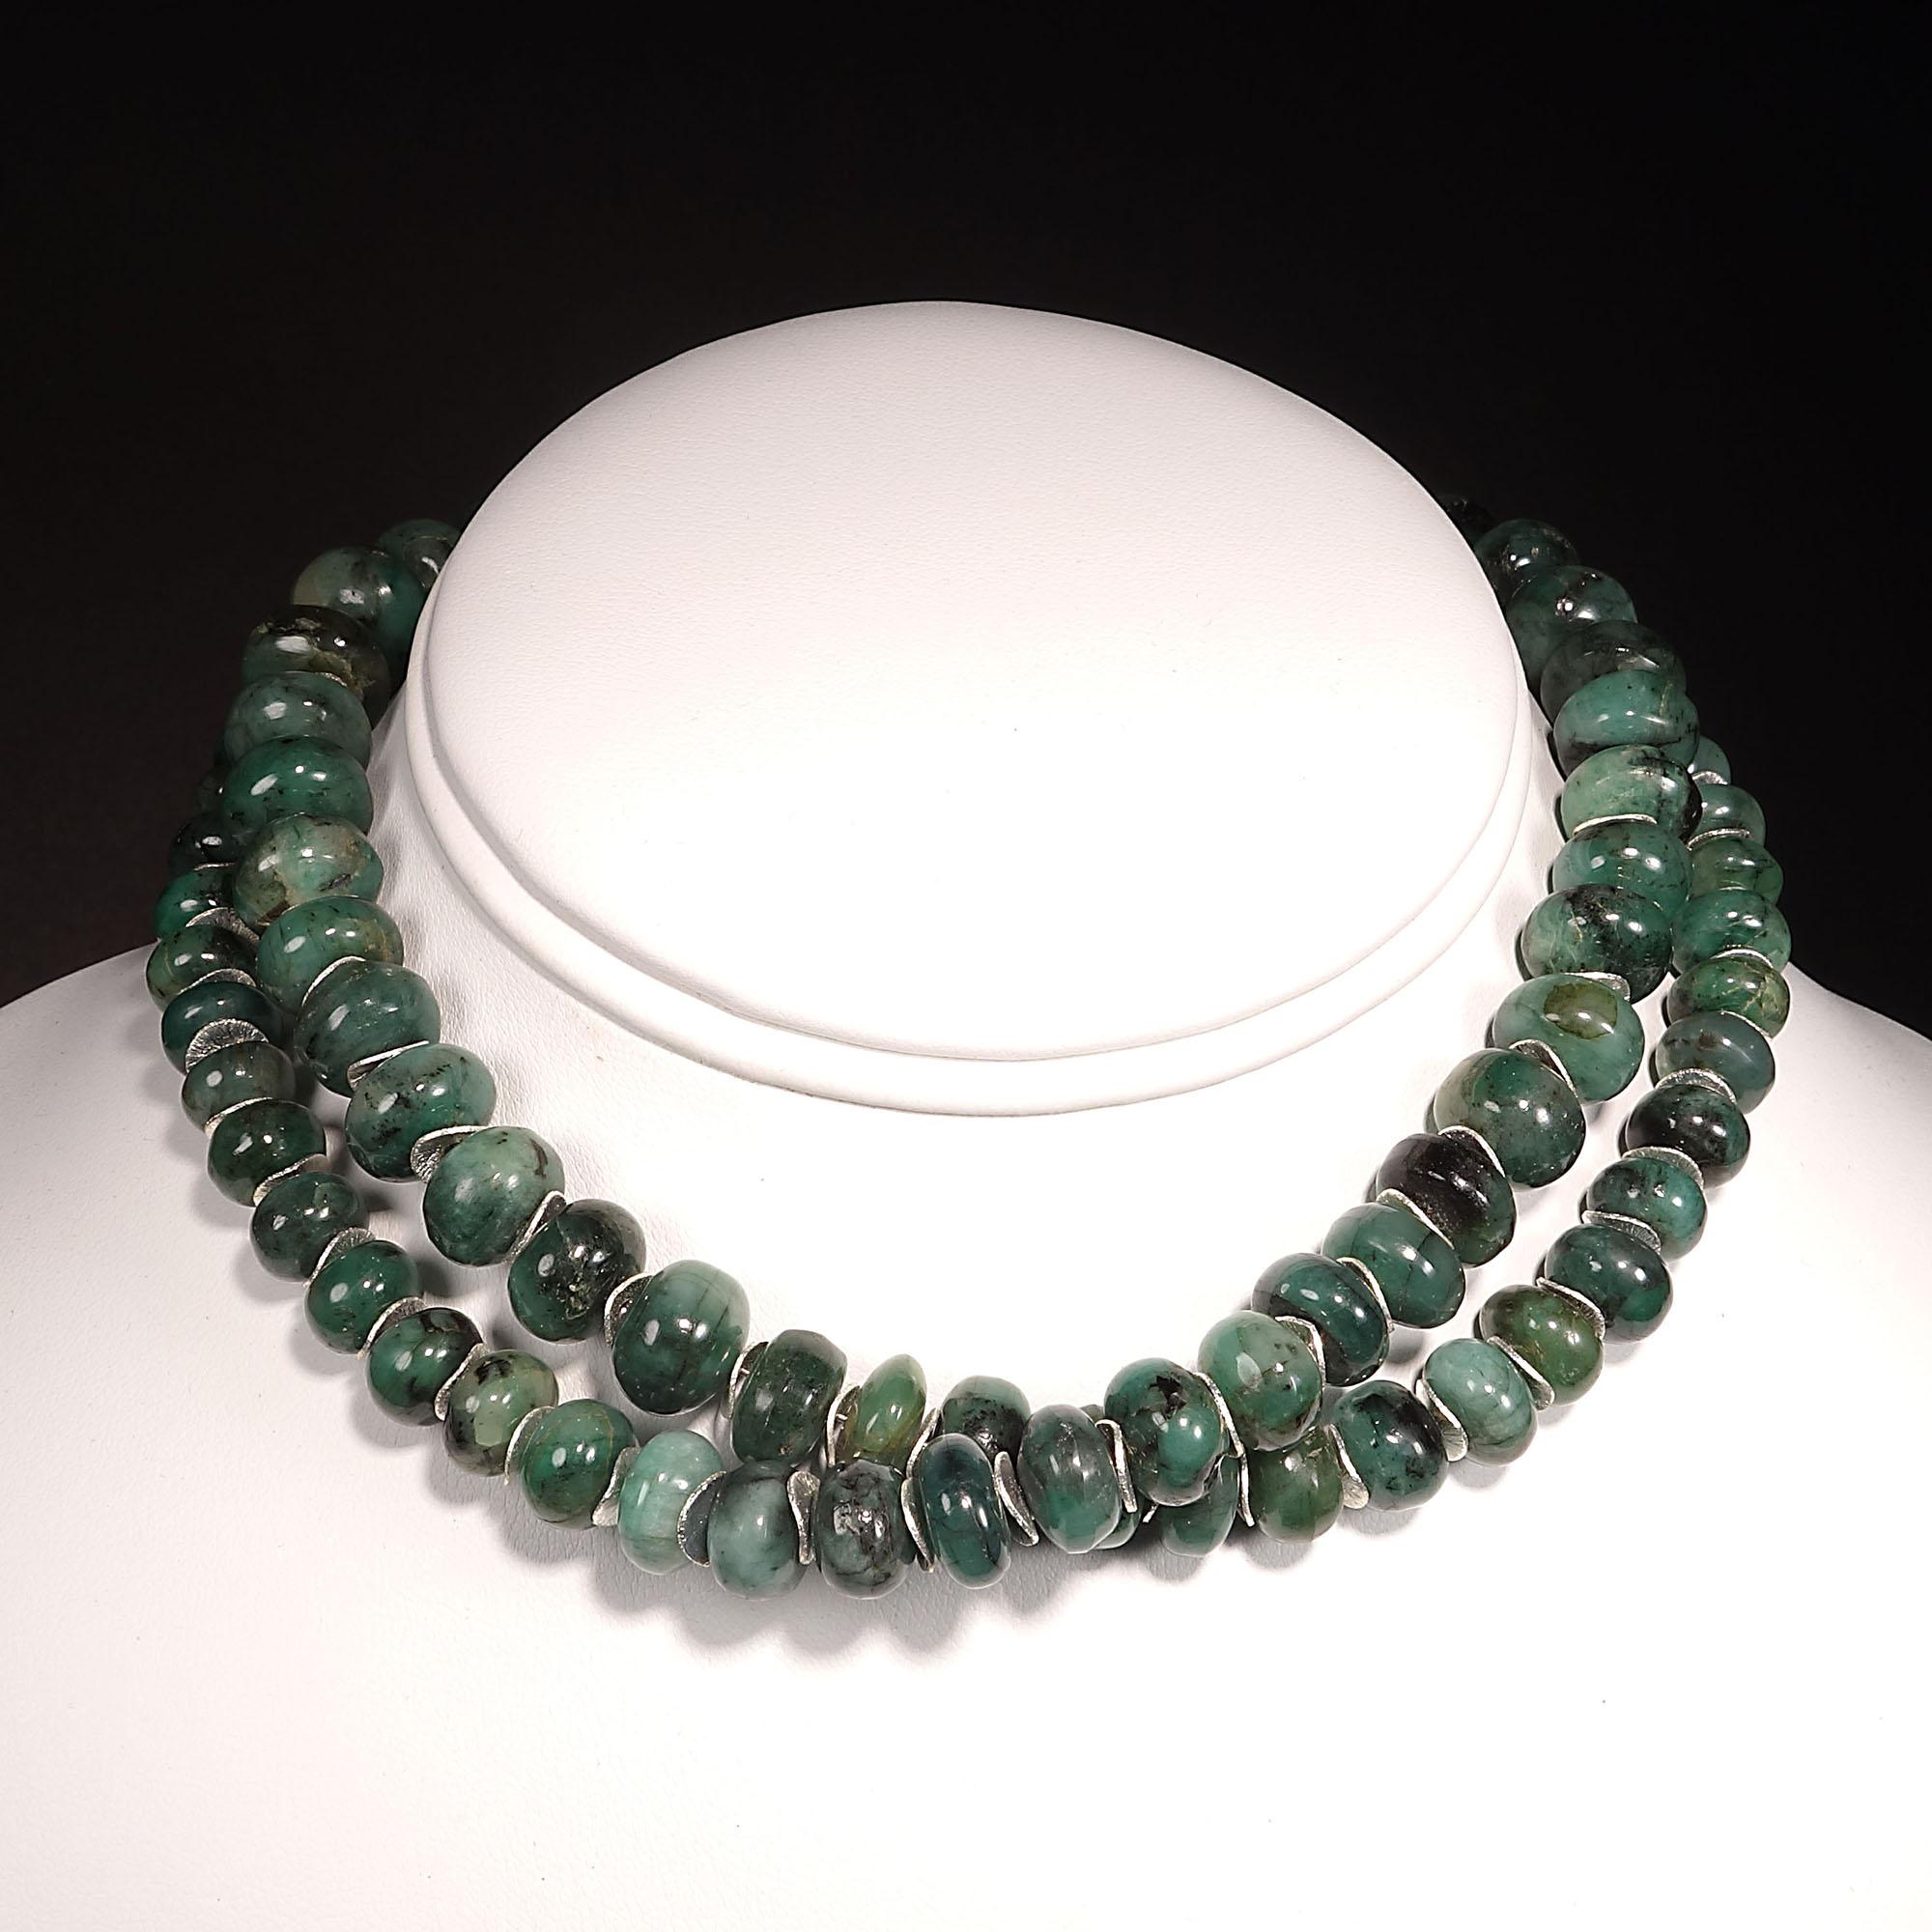 Graduated Emerald Rondelle Necklace with Silver Accents 7